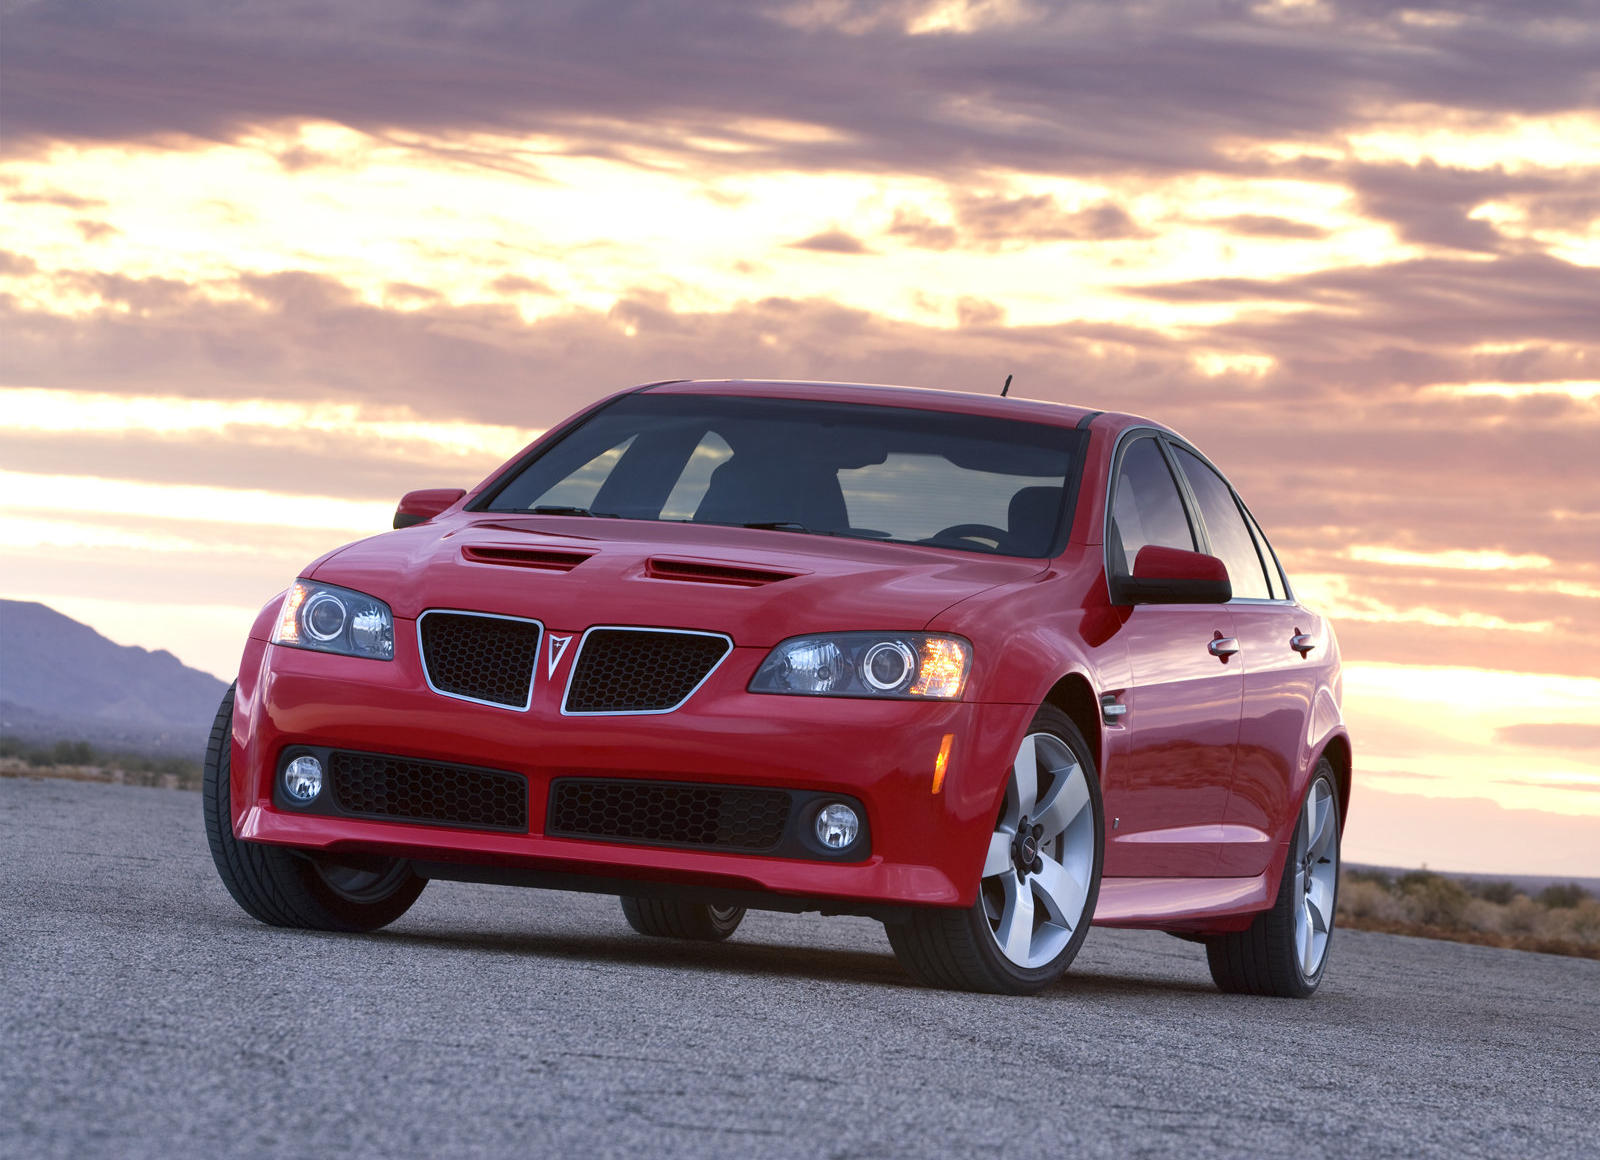 2009 Pontiac G8 Front Angle View